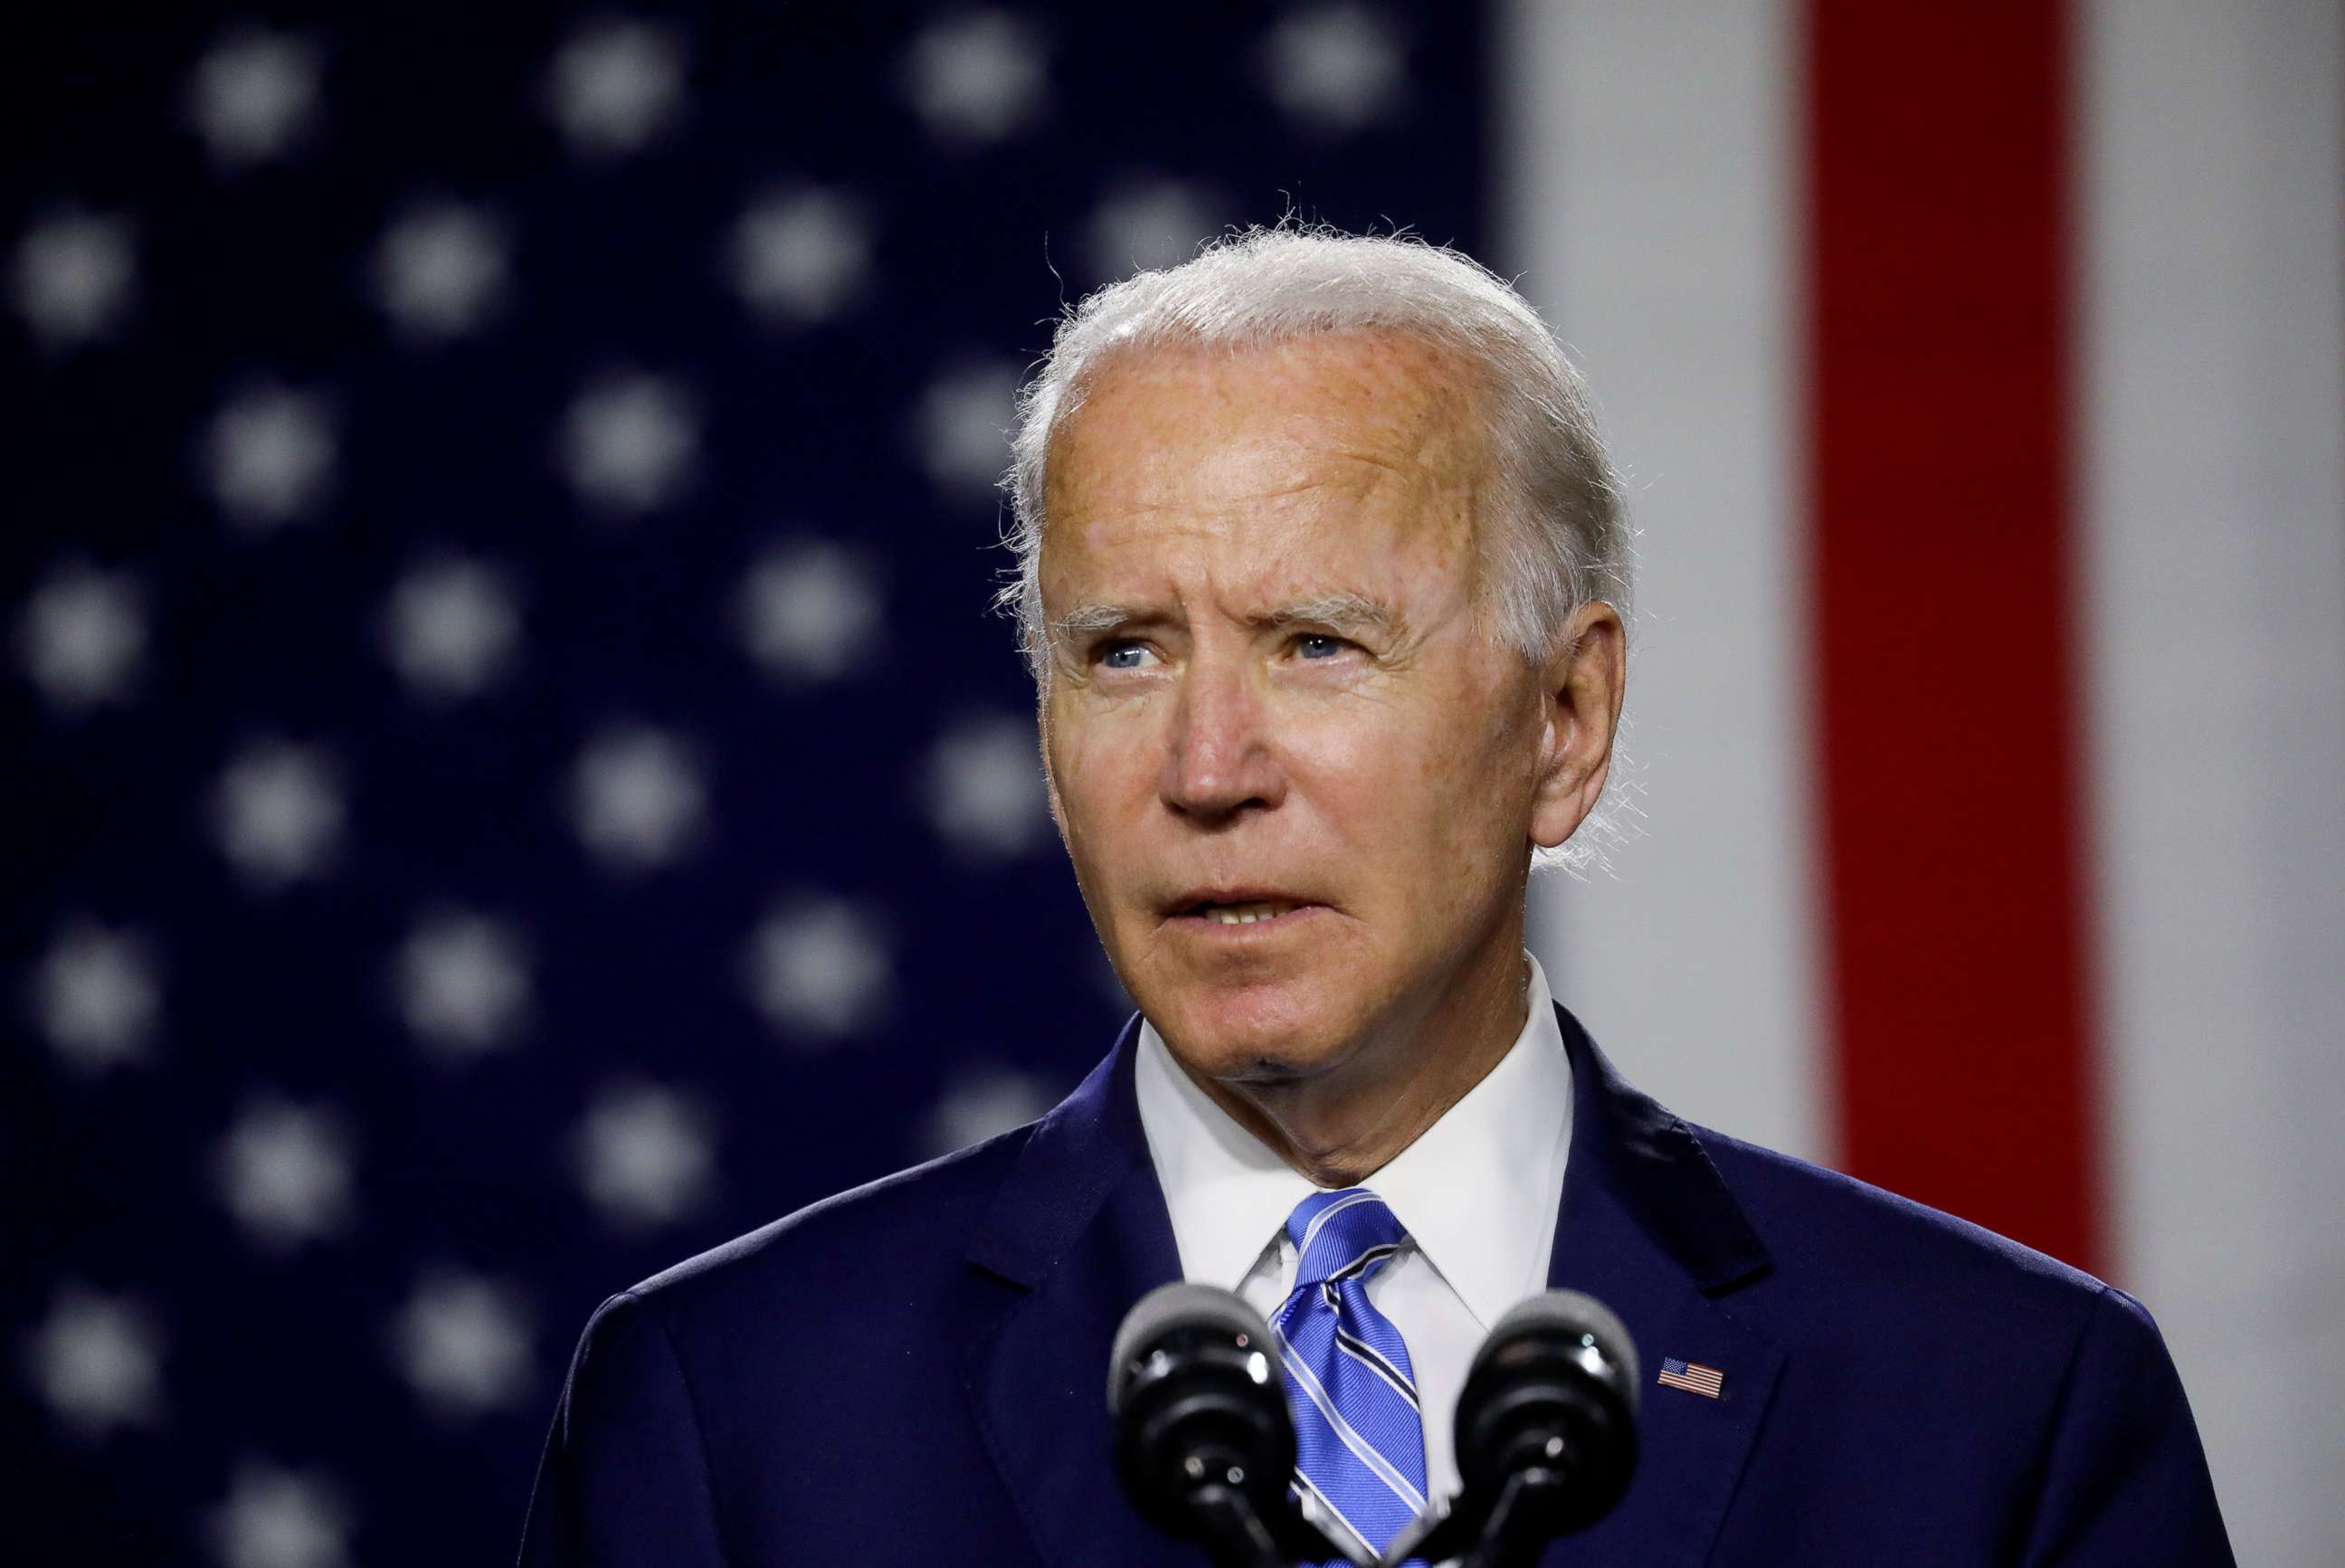 PHOTO: Joe Biden arrives to speak about modernizing infrastructure and his plans for tackling climate change during a campaign event in Wilmington, Delaware, July 14, 2020.